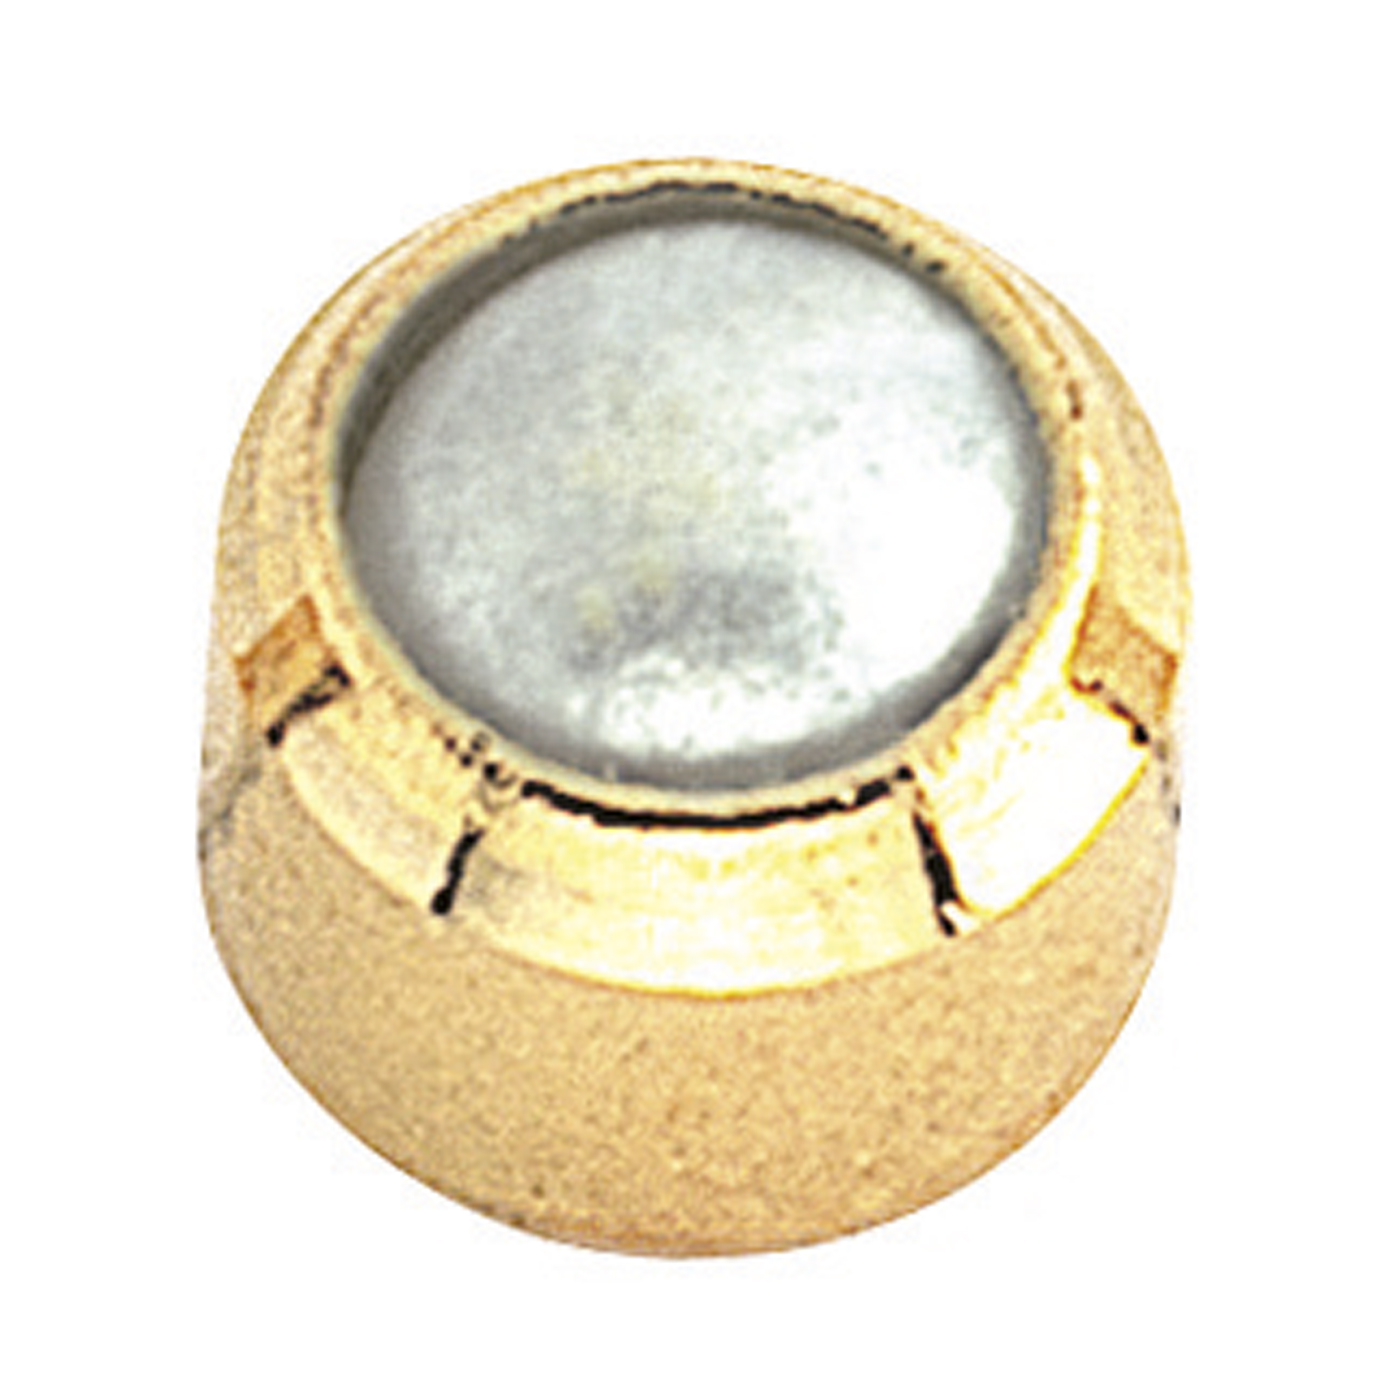 Plus System First Studs, Gold-Plated, Pearl, ø 3.95 mm - 12 x 2 pieces